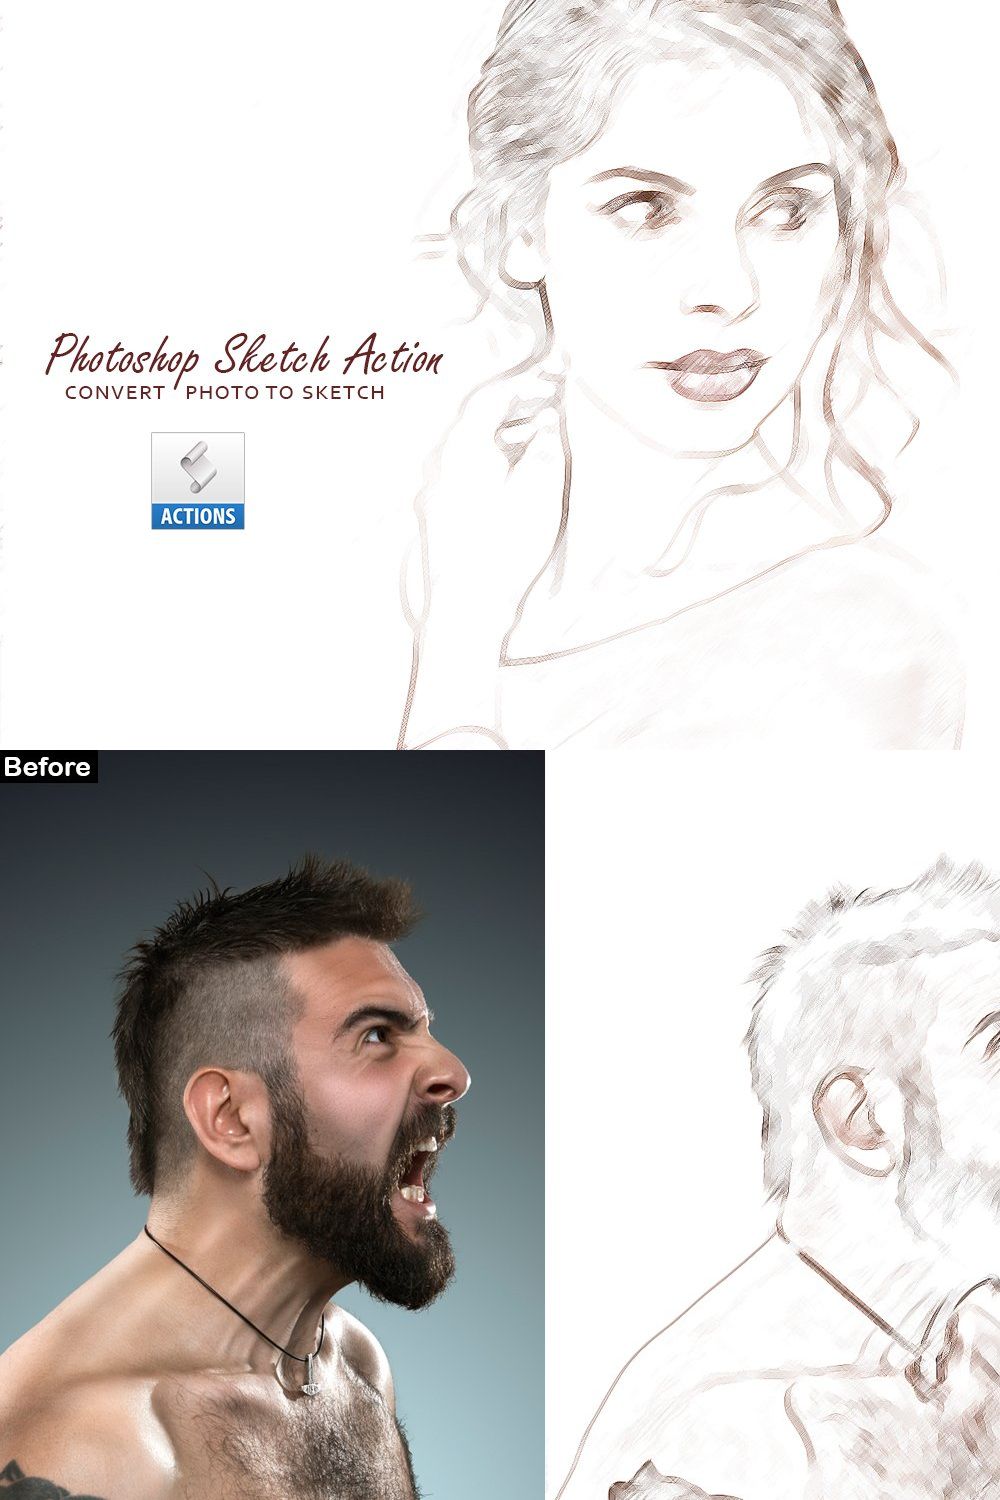 Photoshop Sketch Action pinterest preview image.